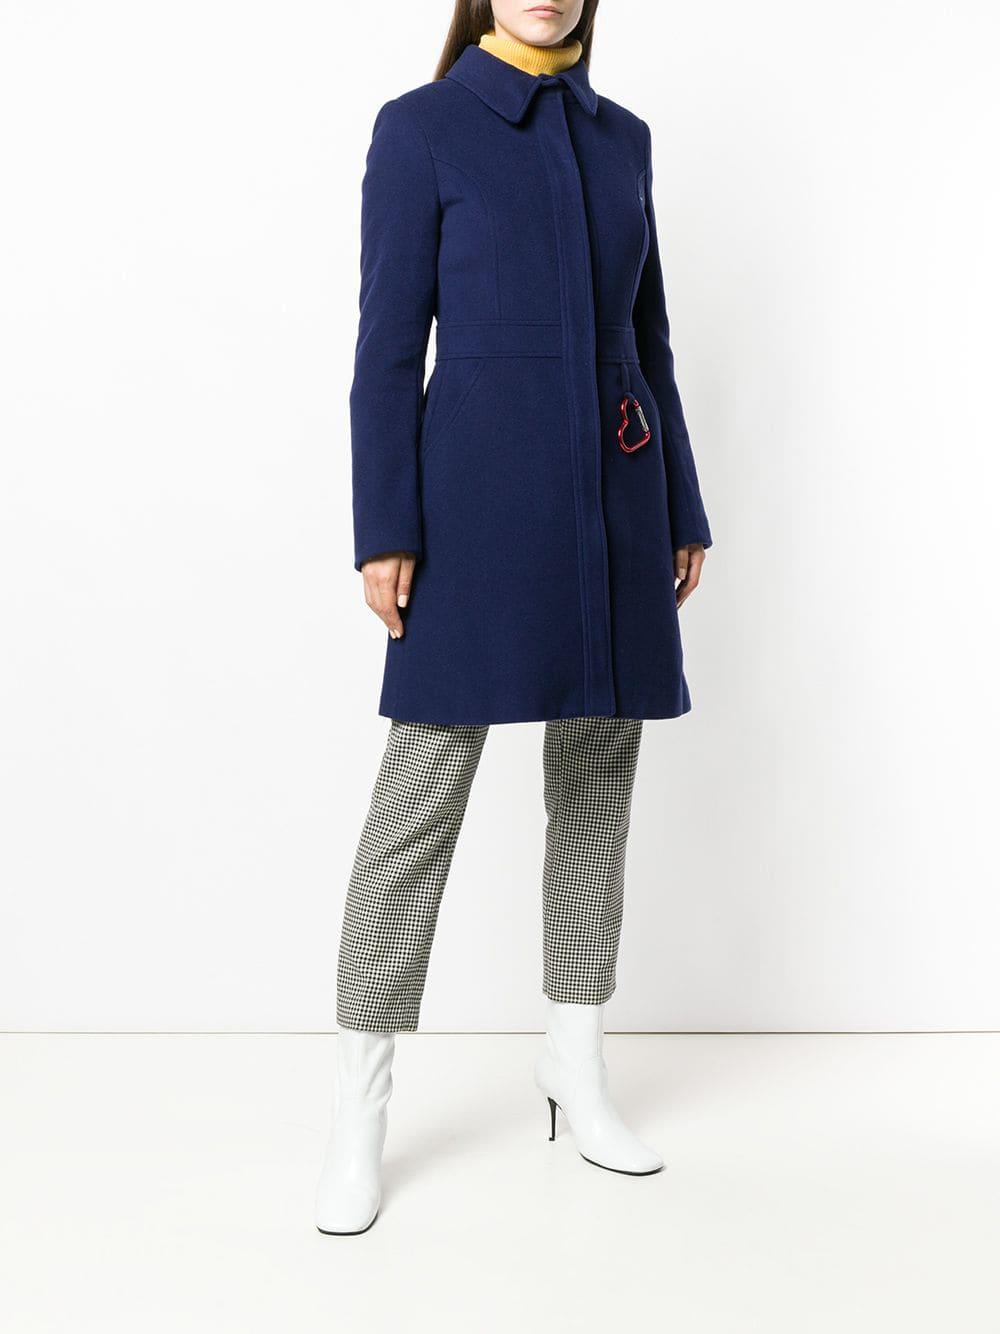 Love Moschino Wool Perfectly Fitted Coat in Blue - Lyst